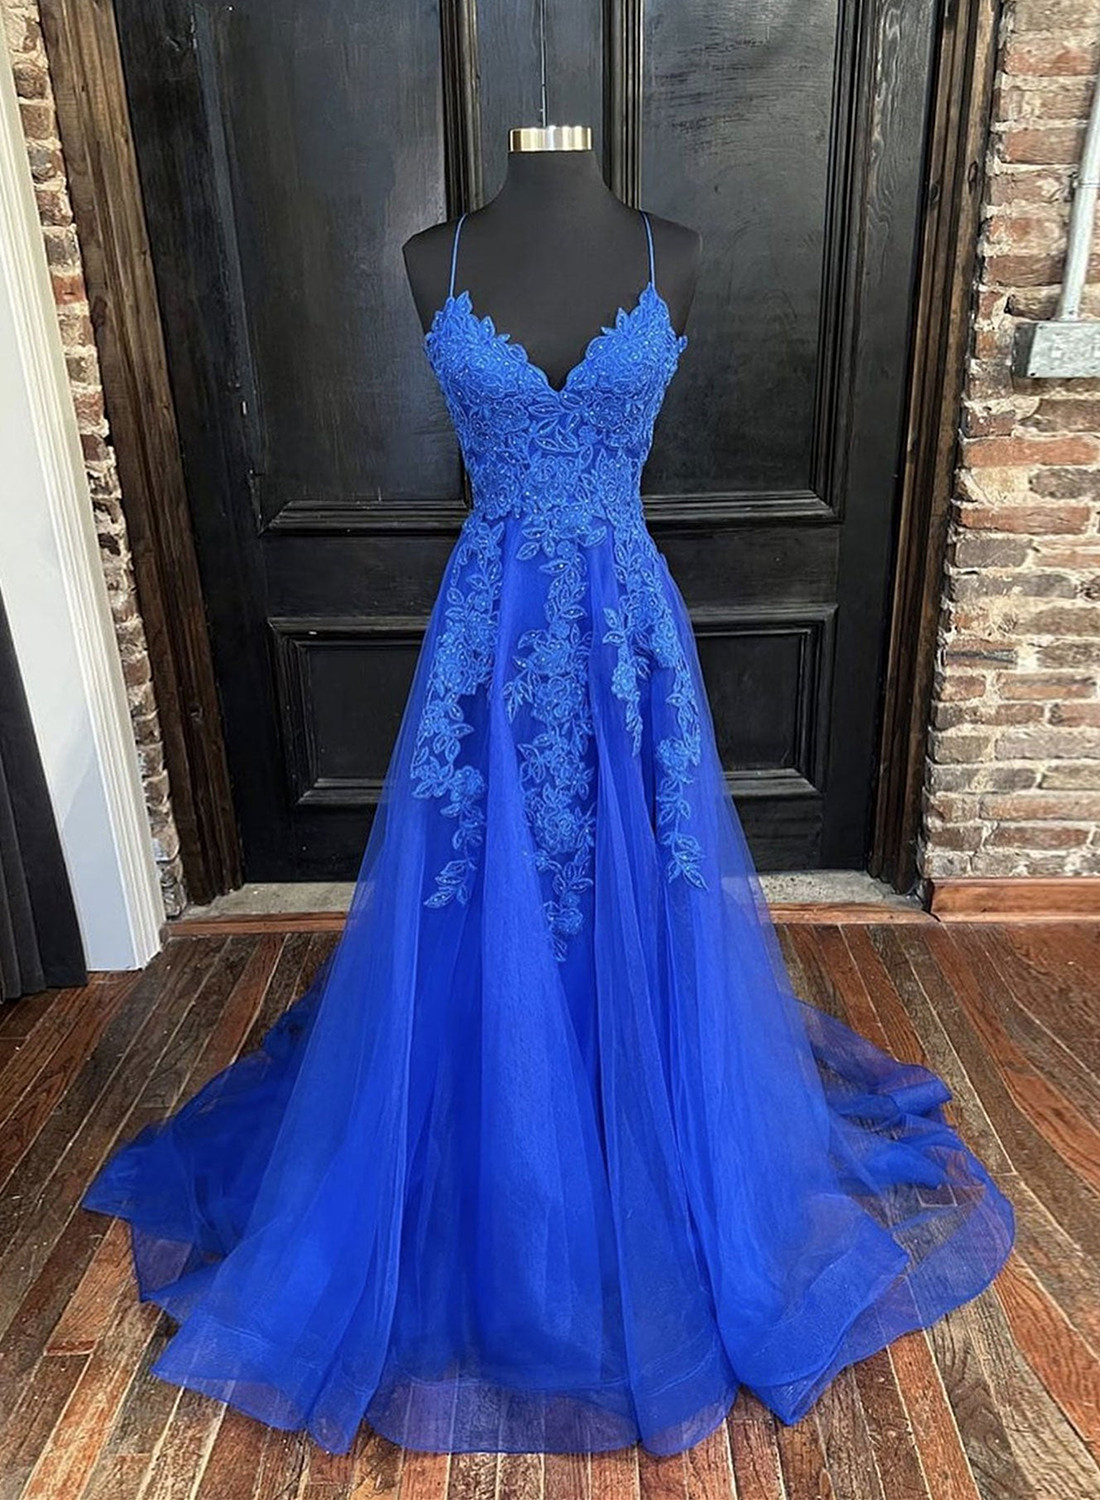 How to Style Royal Blue Lace Dress: Best 10 Elegant Outfit Ideas for Women